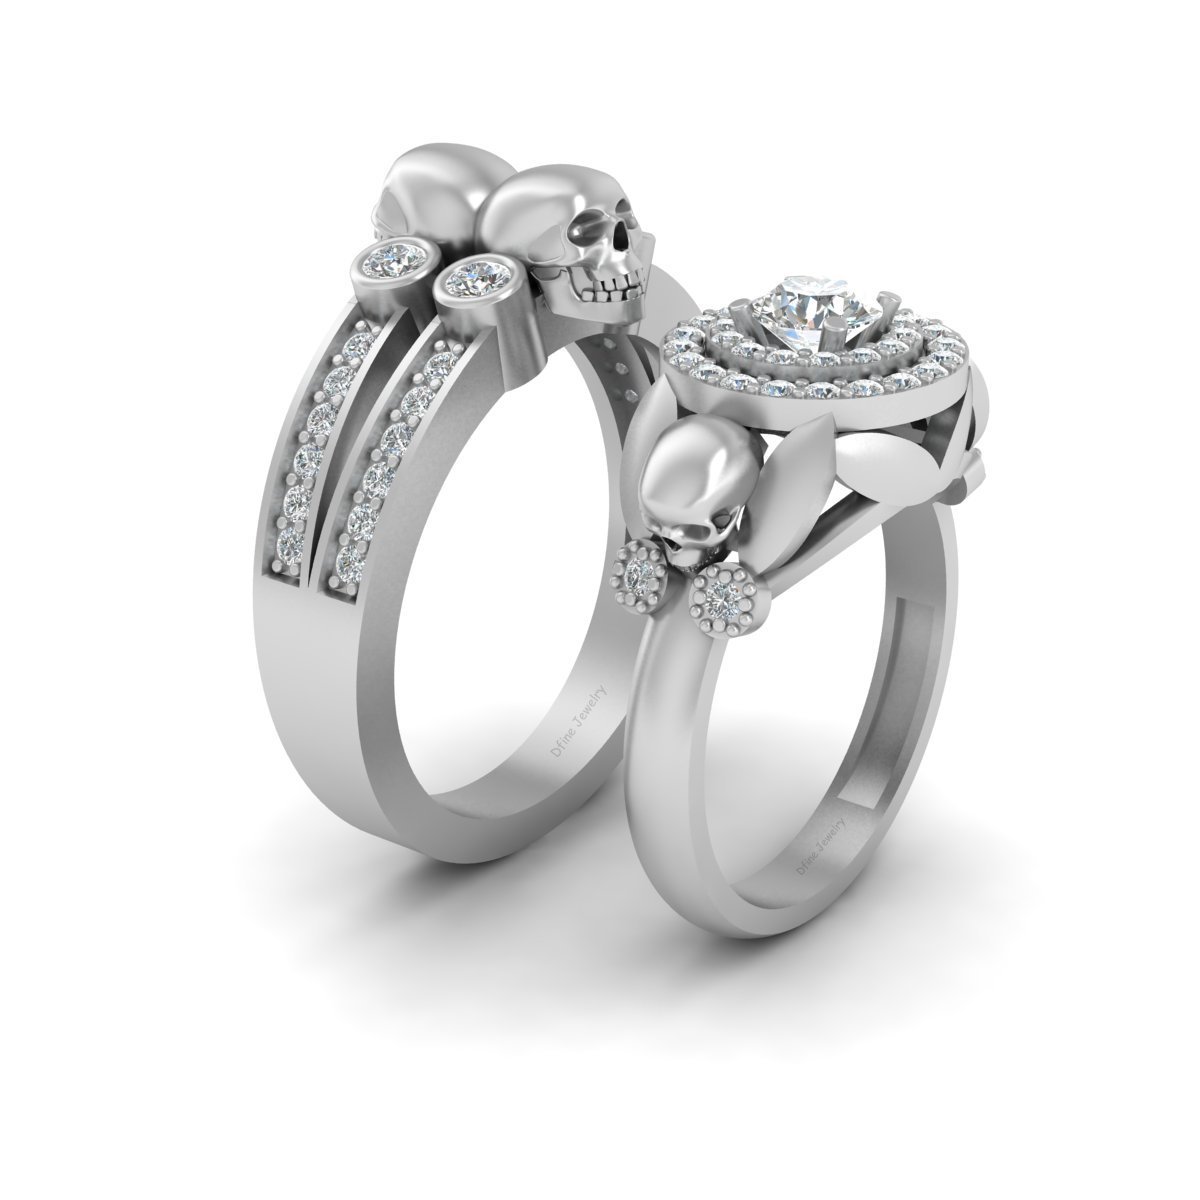 Matching Diamond Skull Engagement Ring Set His and Her Skull Couple Set Silver